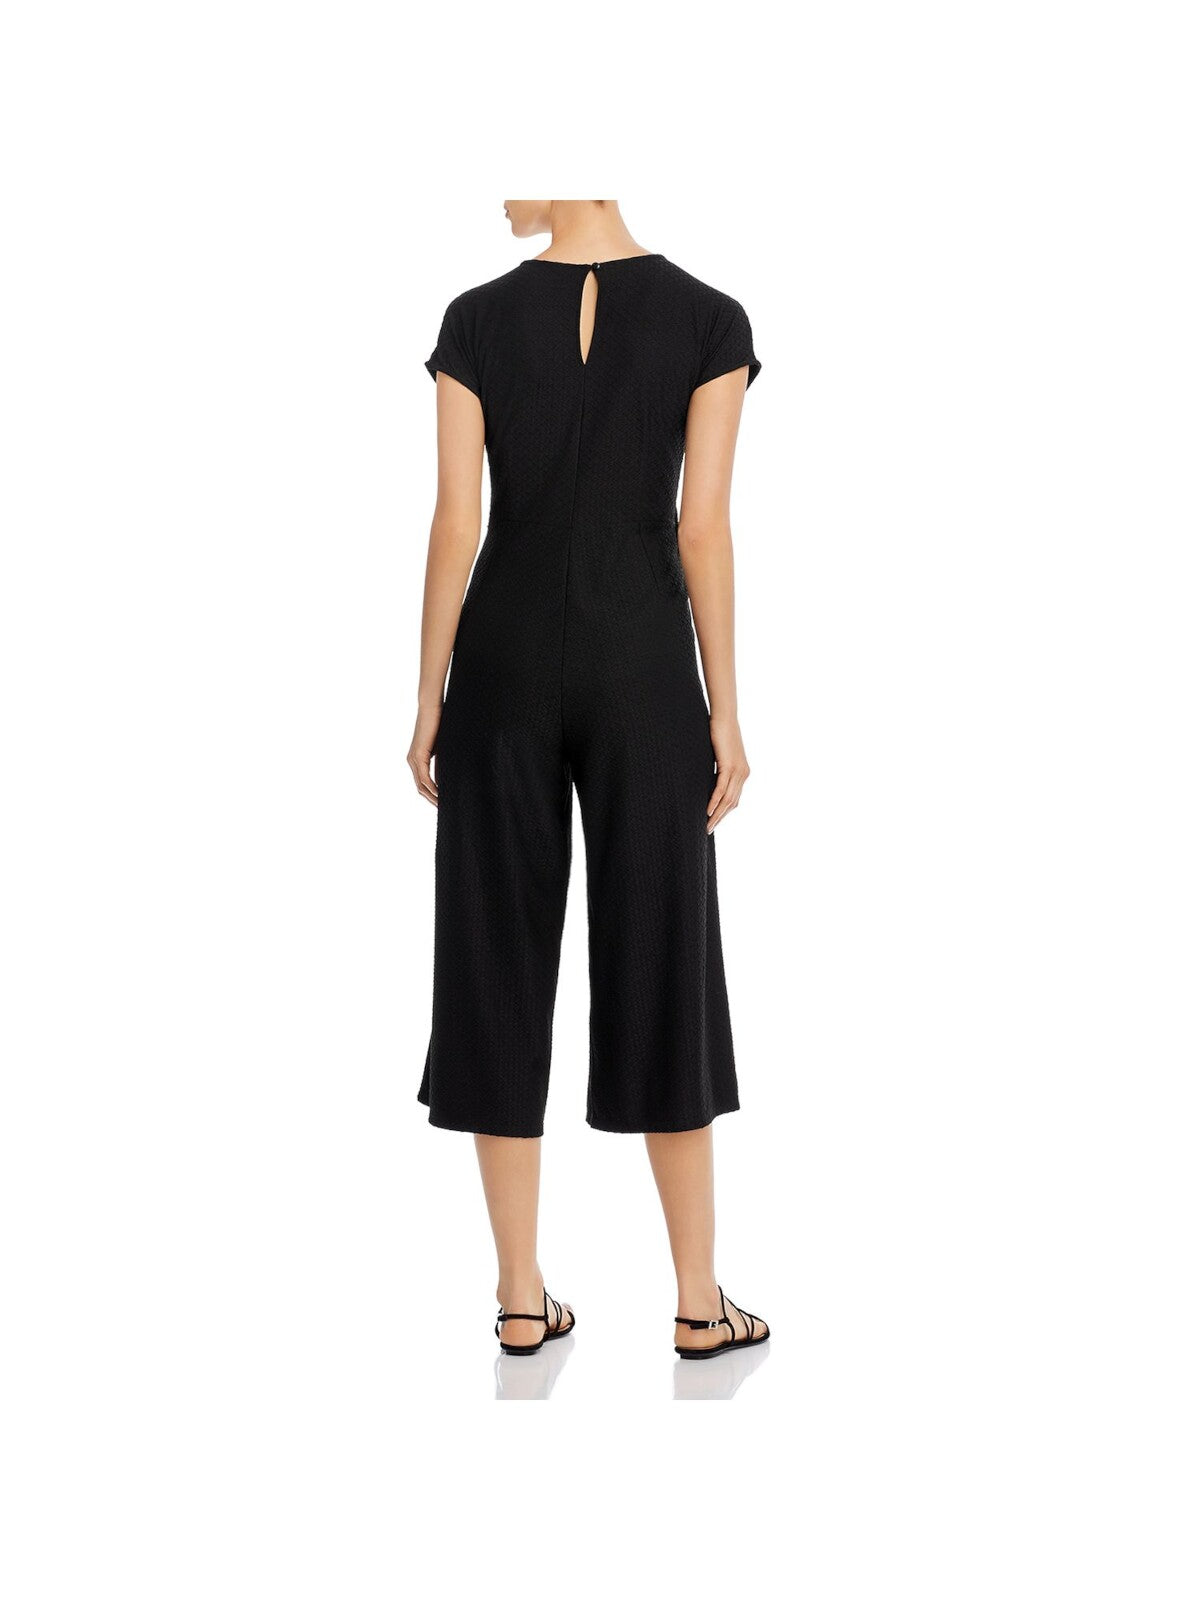 CUPIO Womens Black Stretch Textured Belted Cropped Short Sleeve V Neck Flare Jumpsuit S